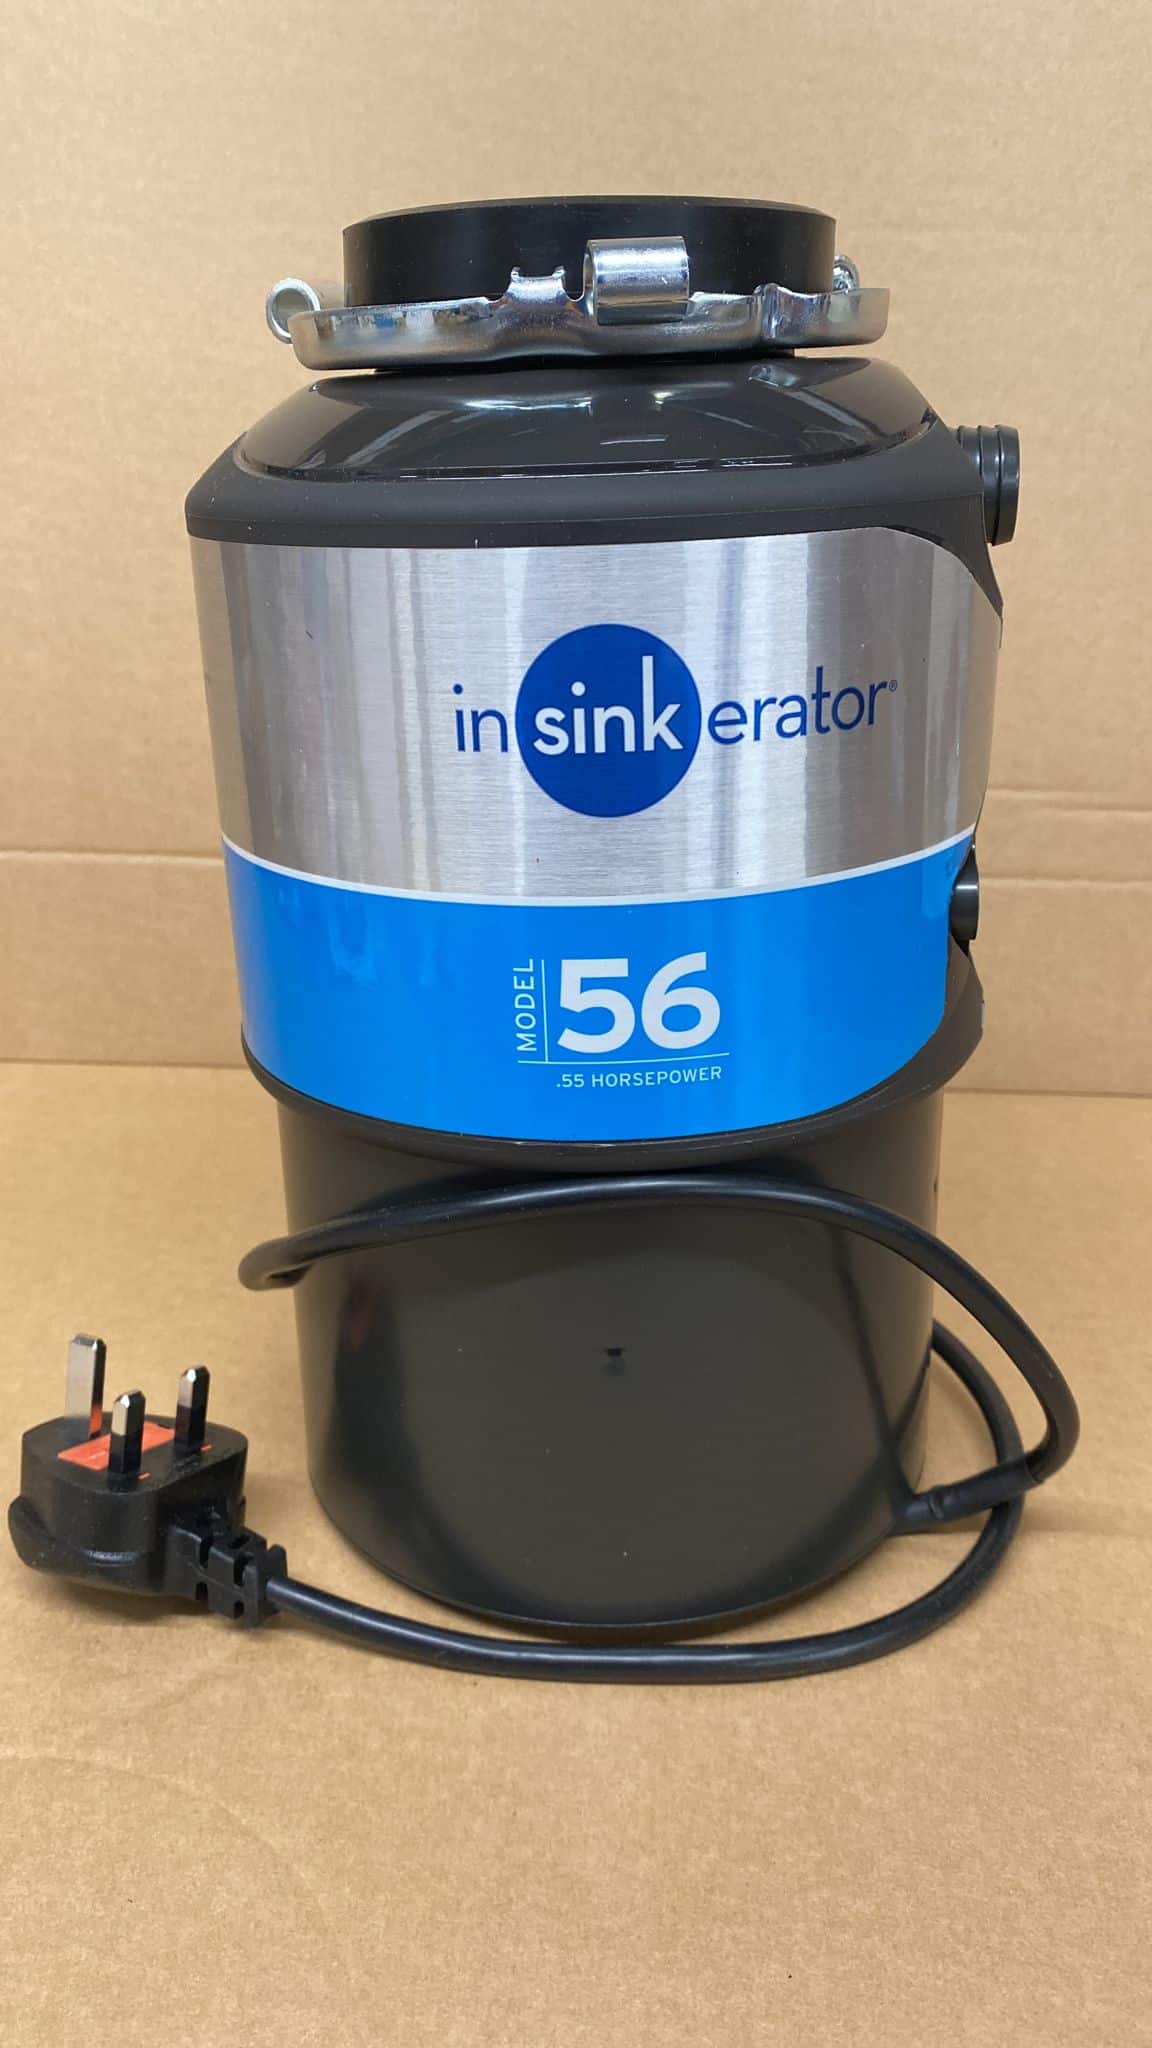 InSinkErator Model 56 Kitchen sink waste disposer With Air Switch 9960